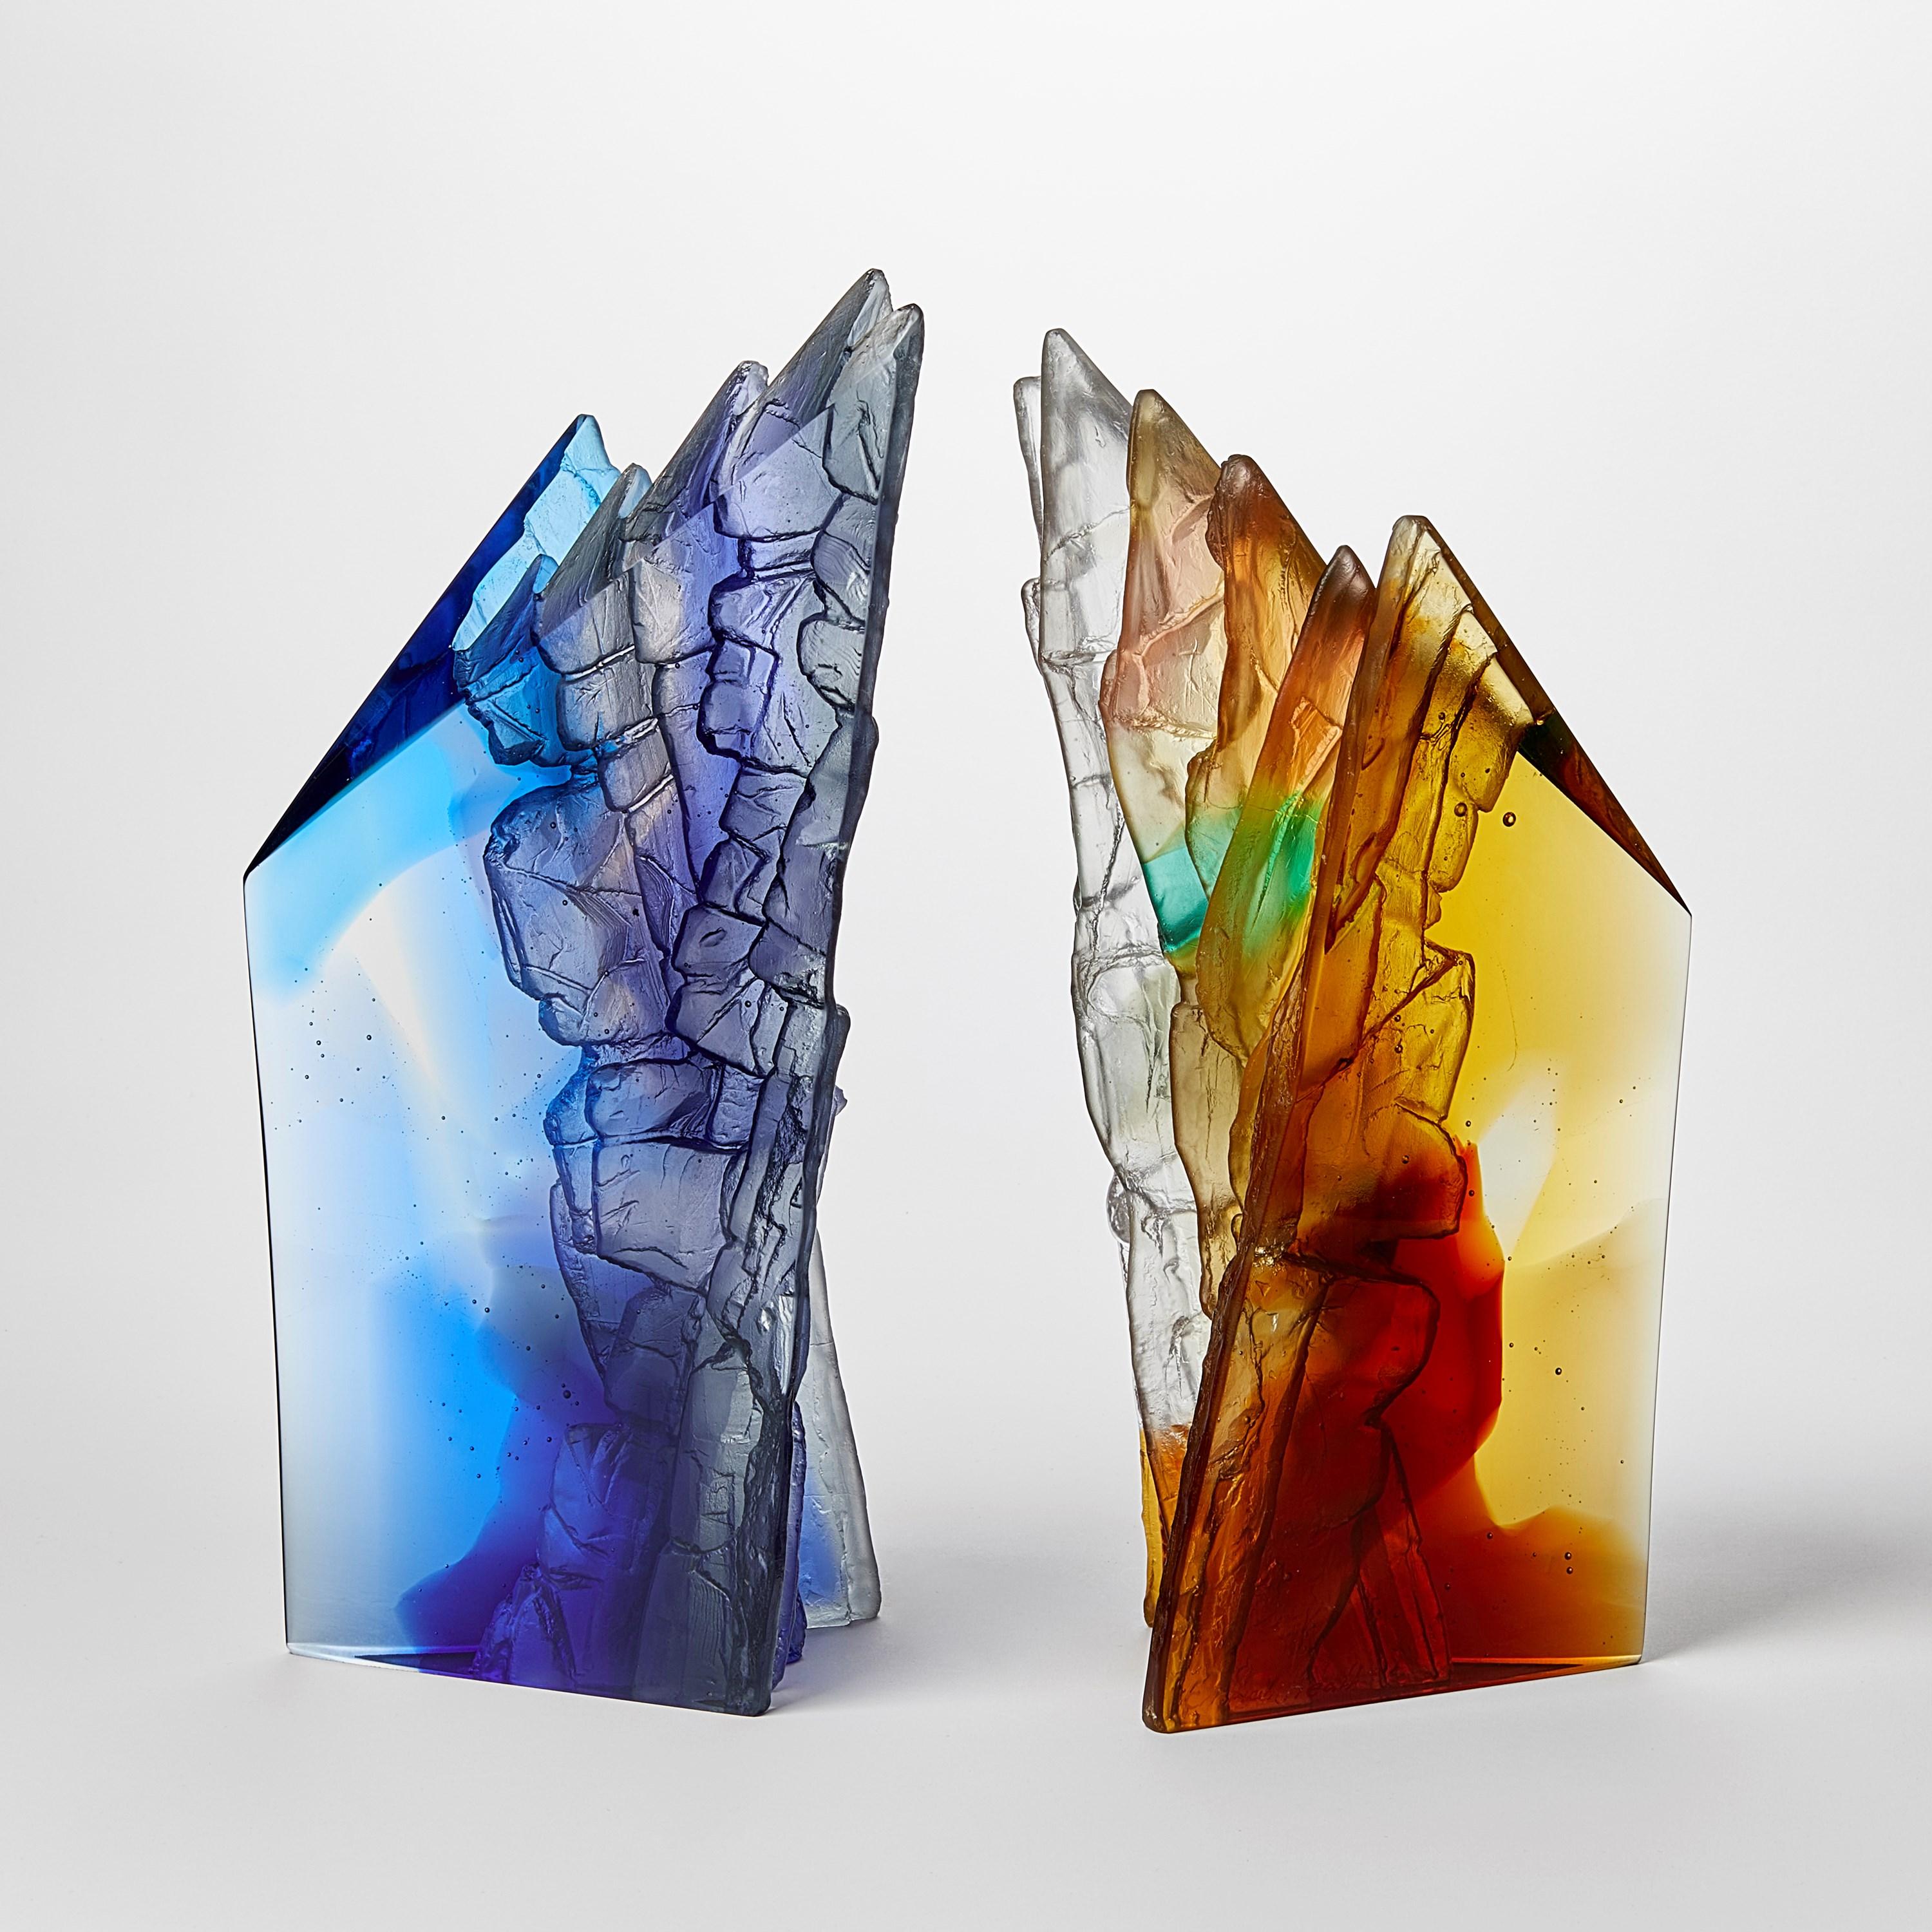 Hand-Crafted Amber Cliff, dark amber & green cliff inspired glass sculpture by Crispian Heath